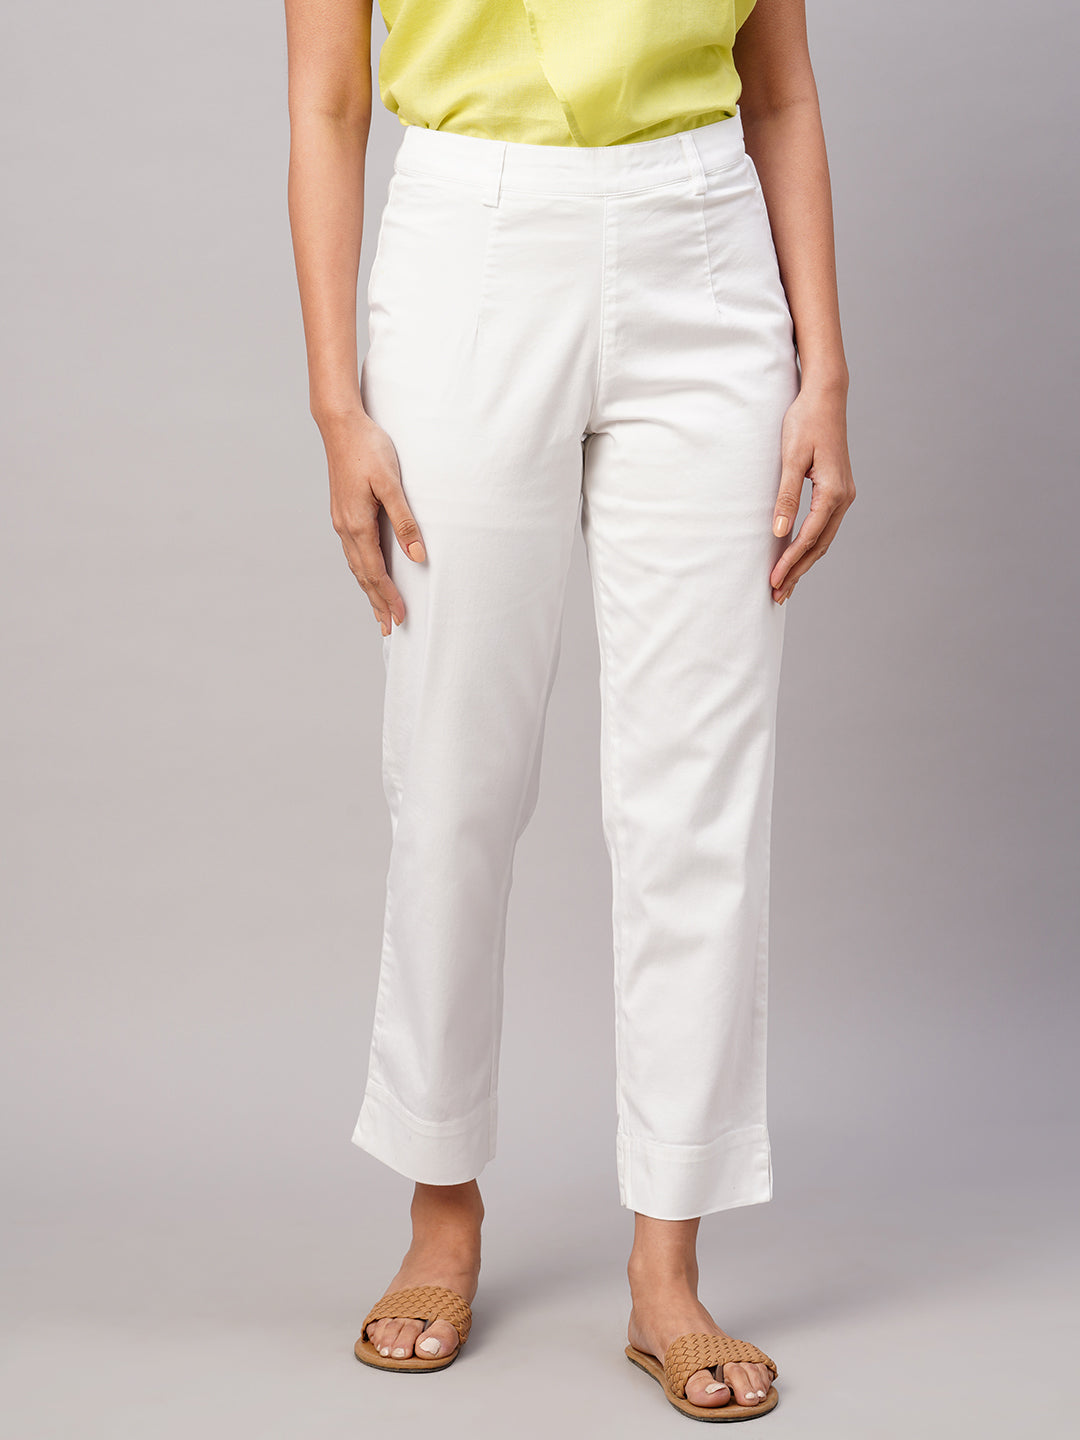 Marilyn Straight Ankle Pants In Stretch Linen - Optic White White | NYDJ